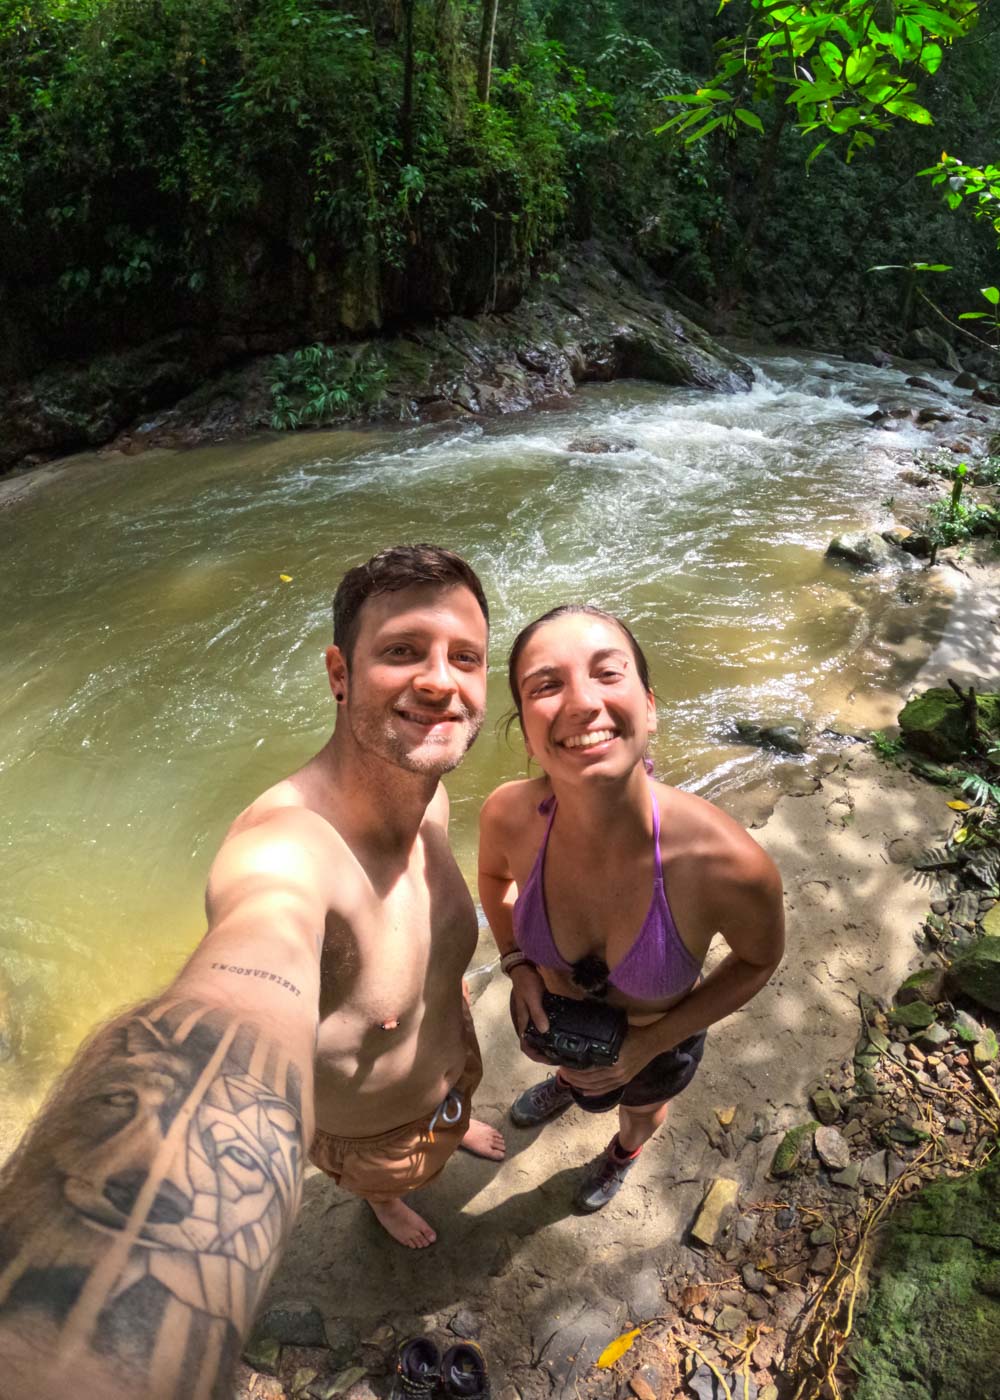 Ryan in an orange bathing suit and Sara in a purple bikini taking a selfie while standing besides a river in Minca.